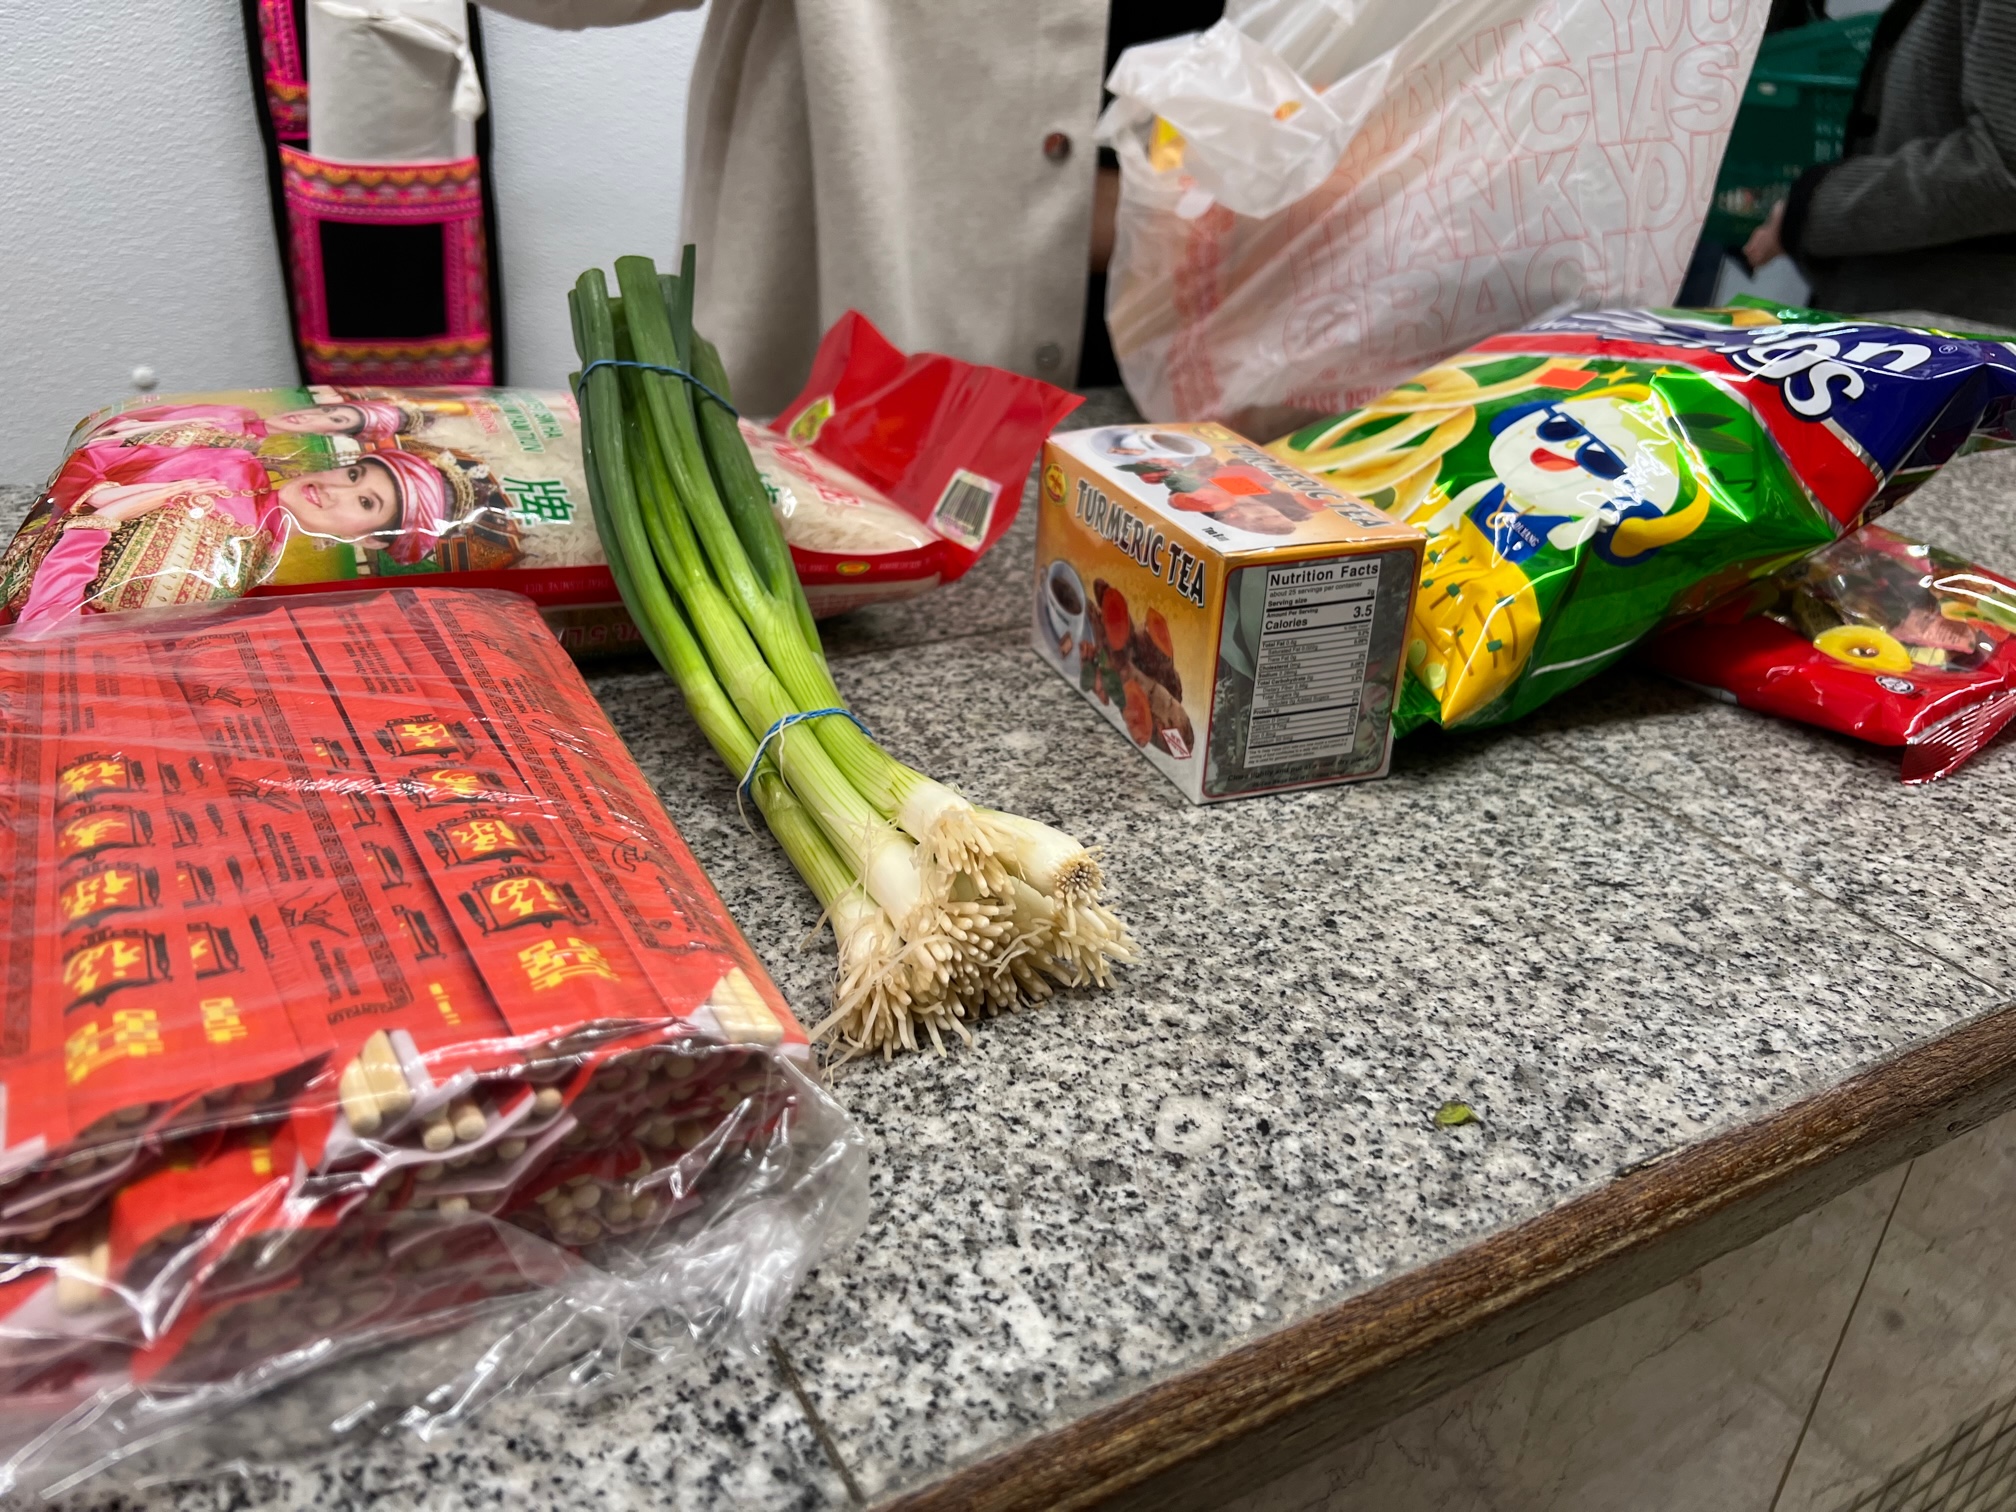 On a gray speckled counter, there is the author's purchase: chopsticks, green onions, snacks, and canned jars. Photo by Alyssa Buckley.